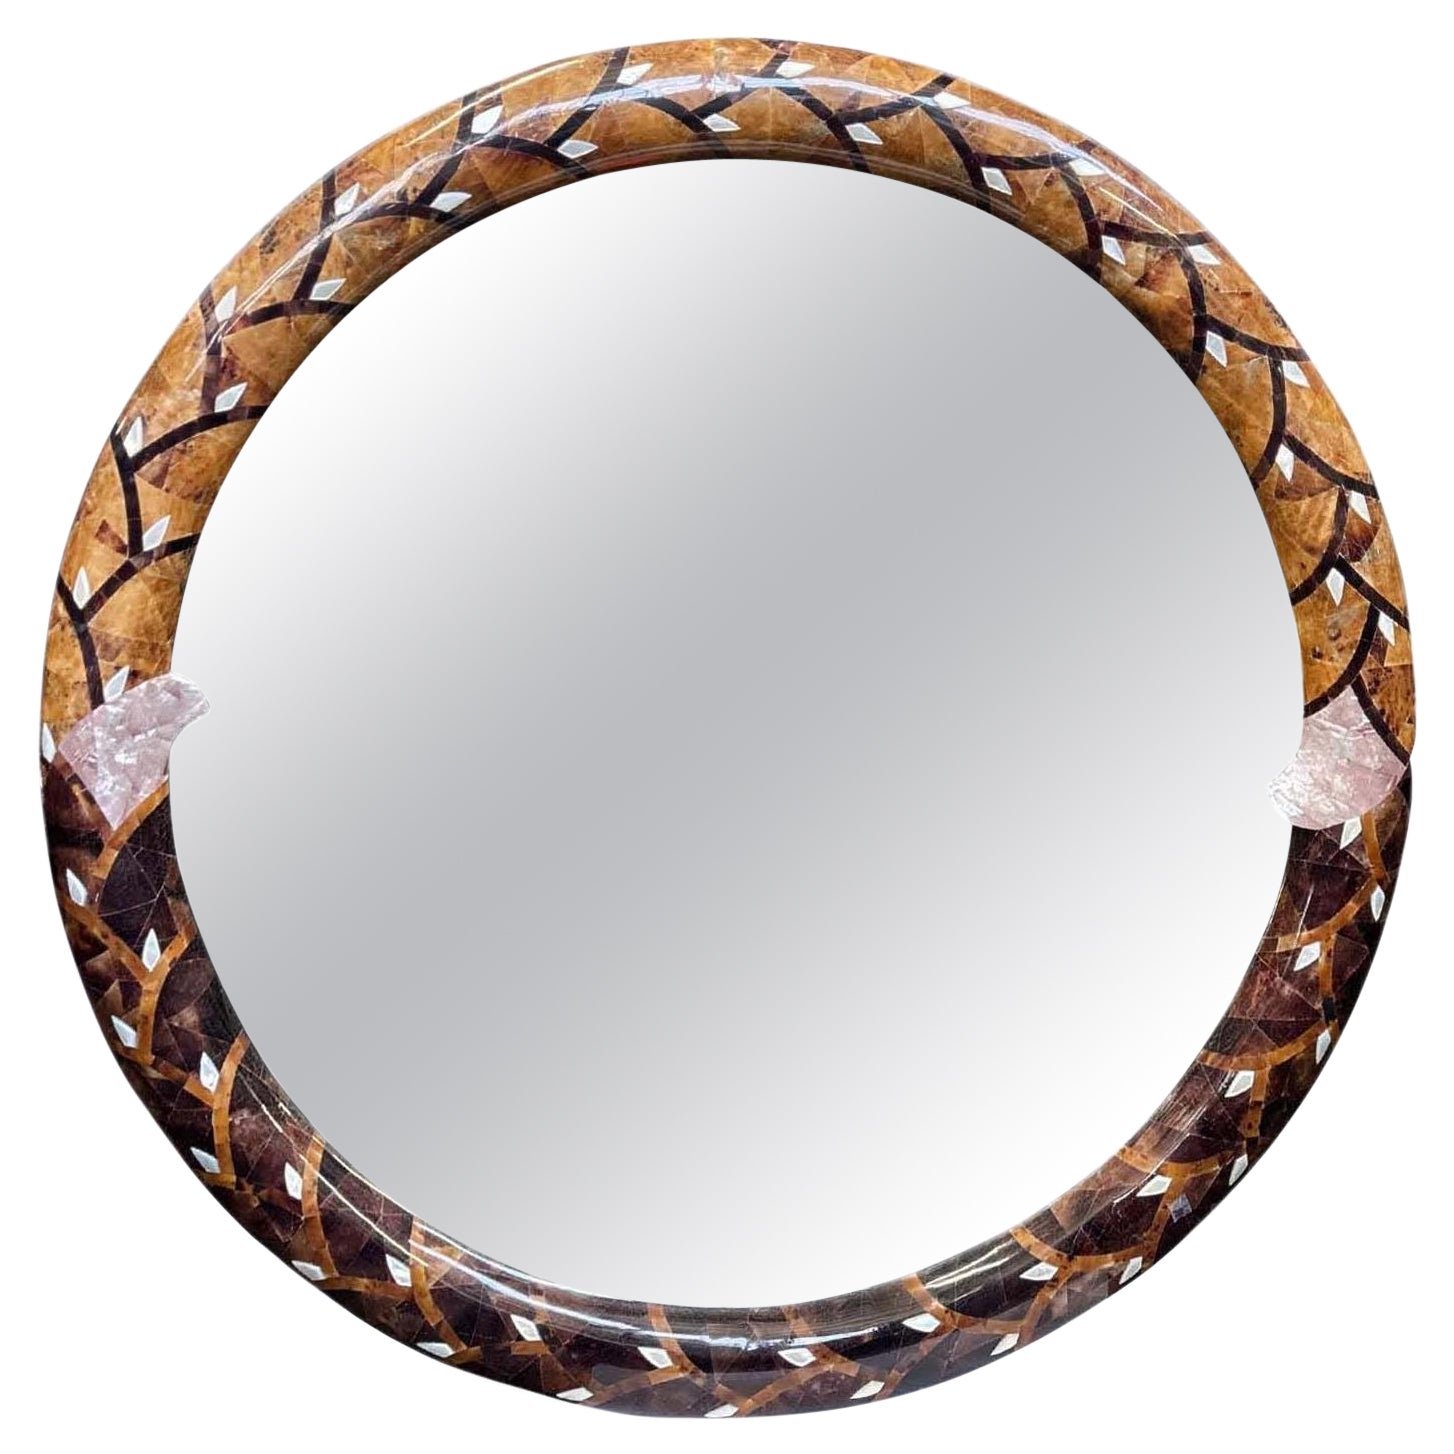 Oversized Vintage Mirror with Mother of Pearl Details by Muramasa Kudo